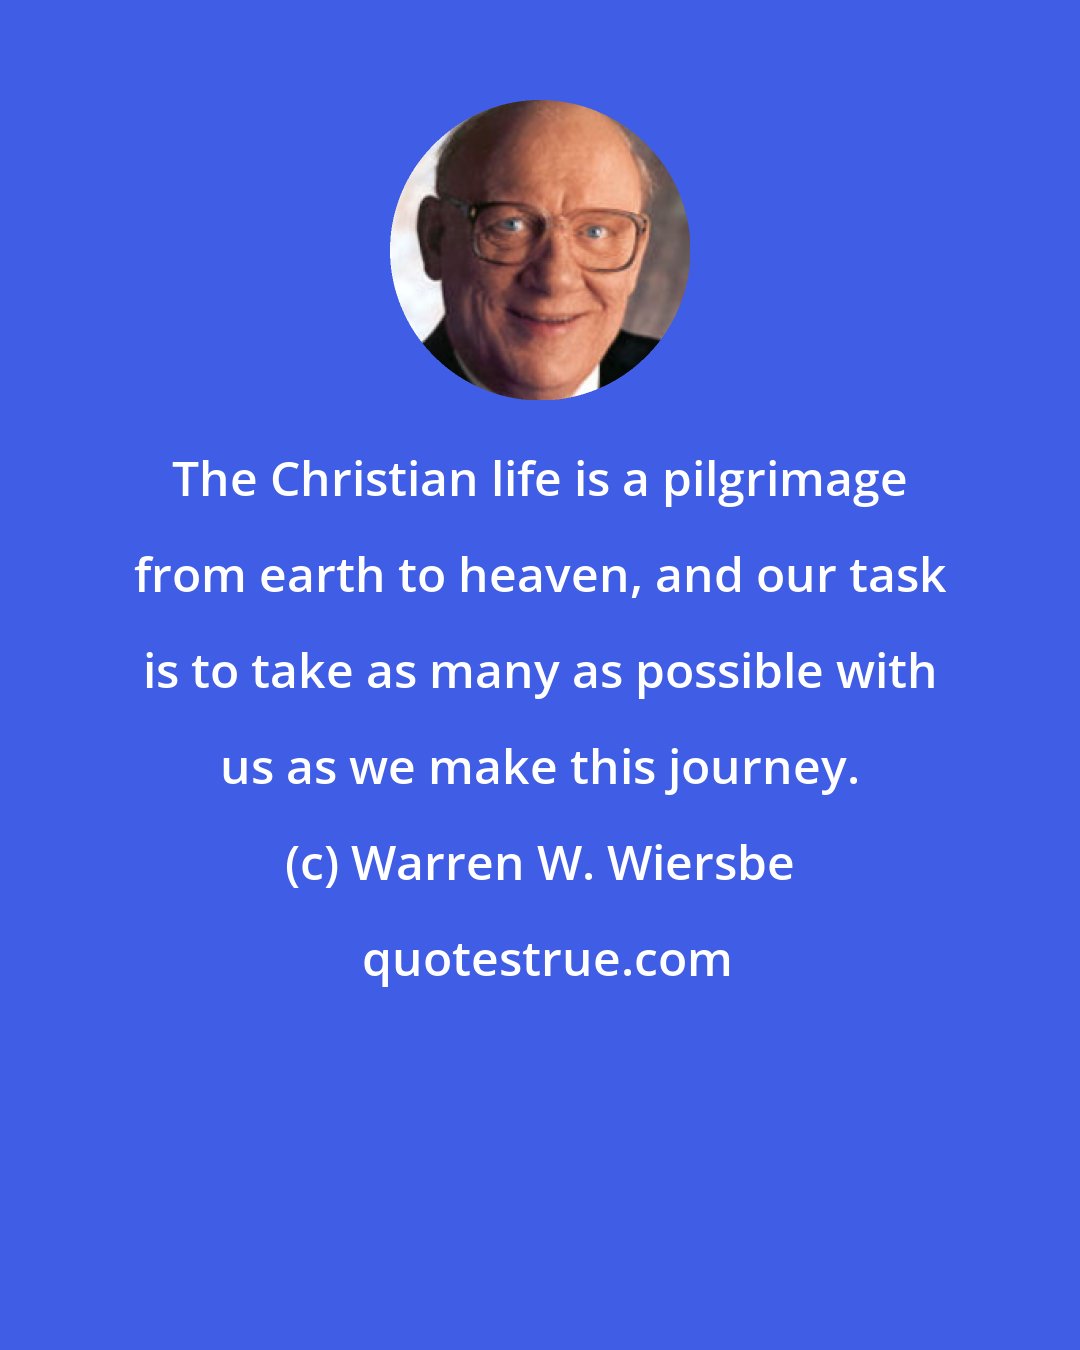 Warren W. Wiersbe: The Christian life is a pilgrimage from earth to heaven, and our task is to take as many as possible with us as we make this journey.